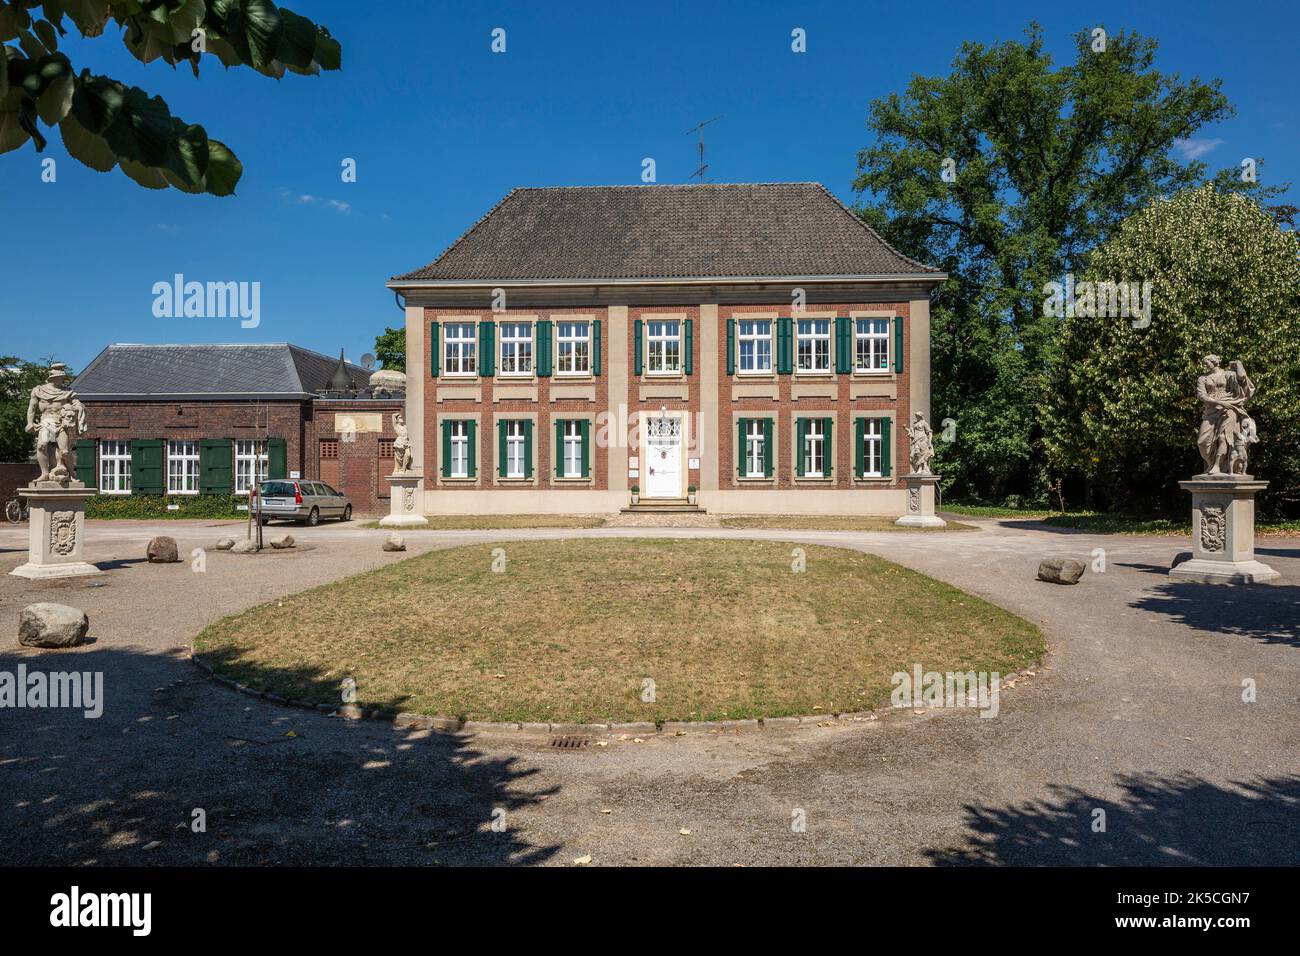 Germany, Bocholt, Lower Rhine, Westmuensterland, Muensterland, Westphalia, North Rhine-Westphalia, NRW, Haus Woord, manor house, late baroque, classicism, statues, depictions of gods Stock Photo